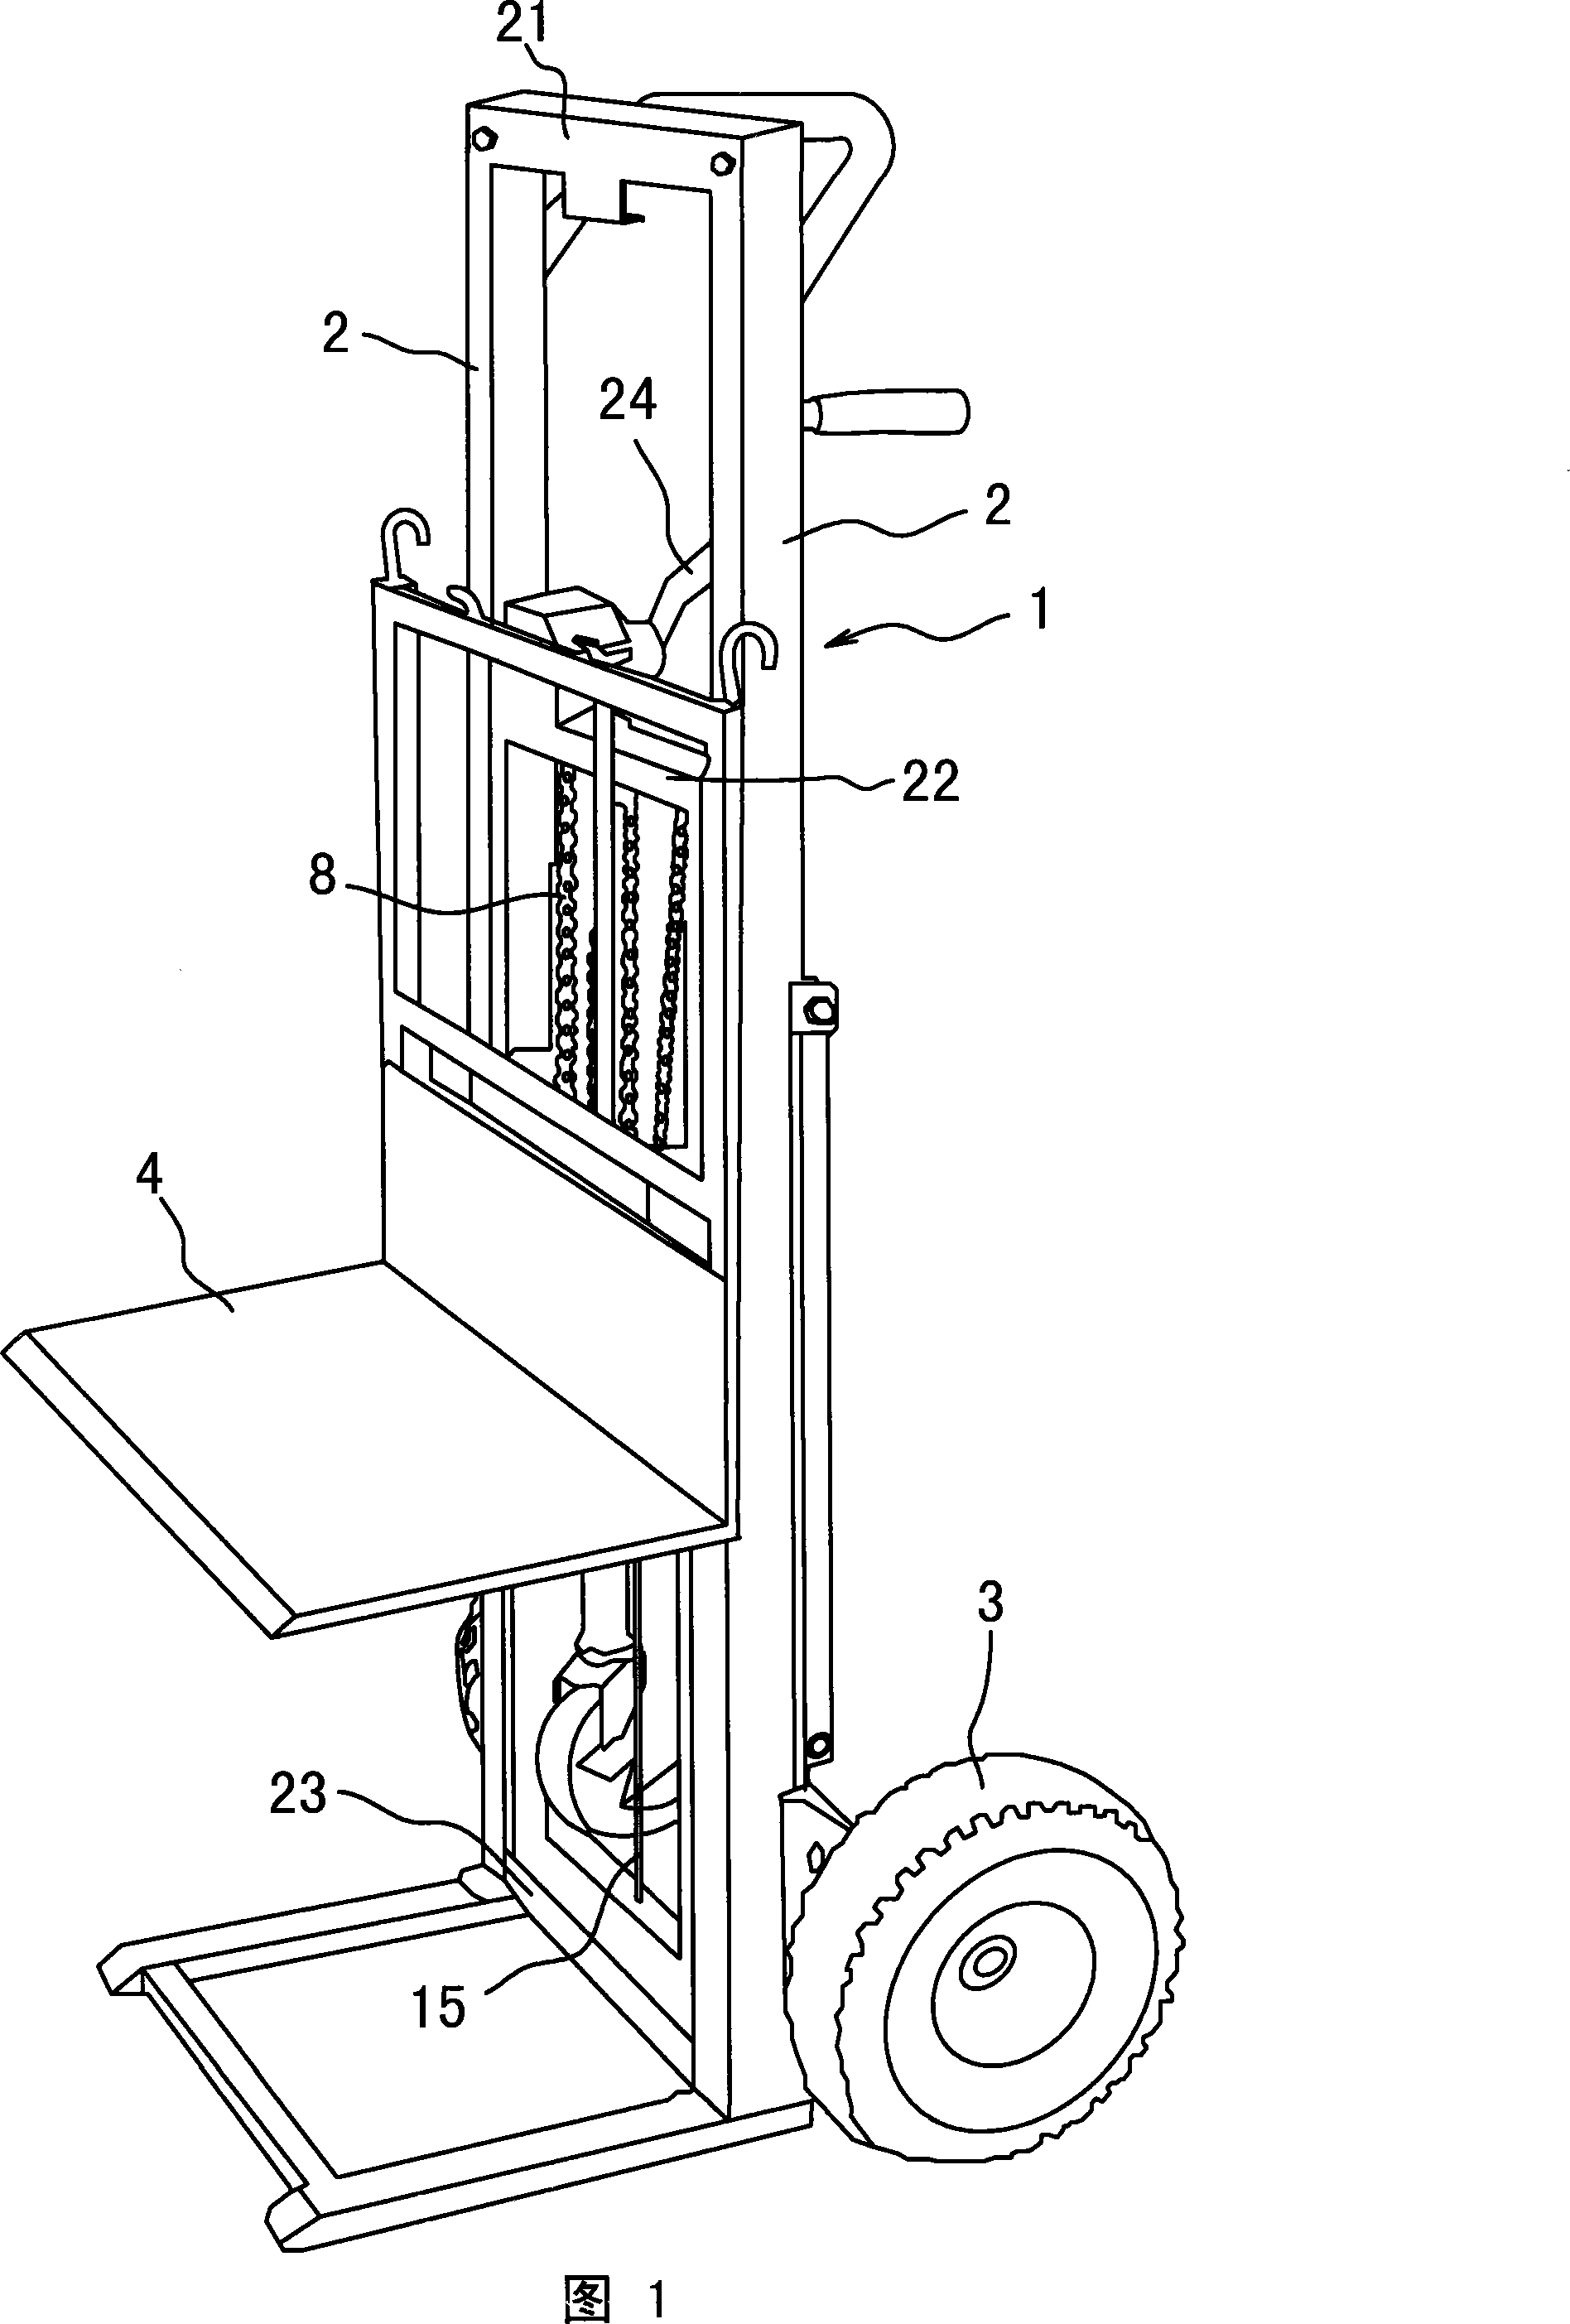 Liftable hand propelled carrying vehicle